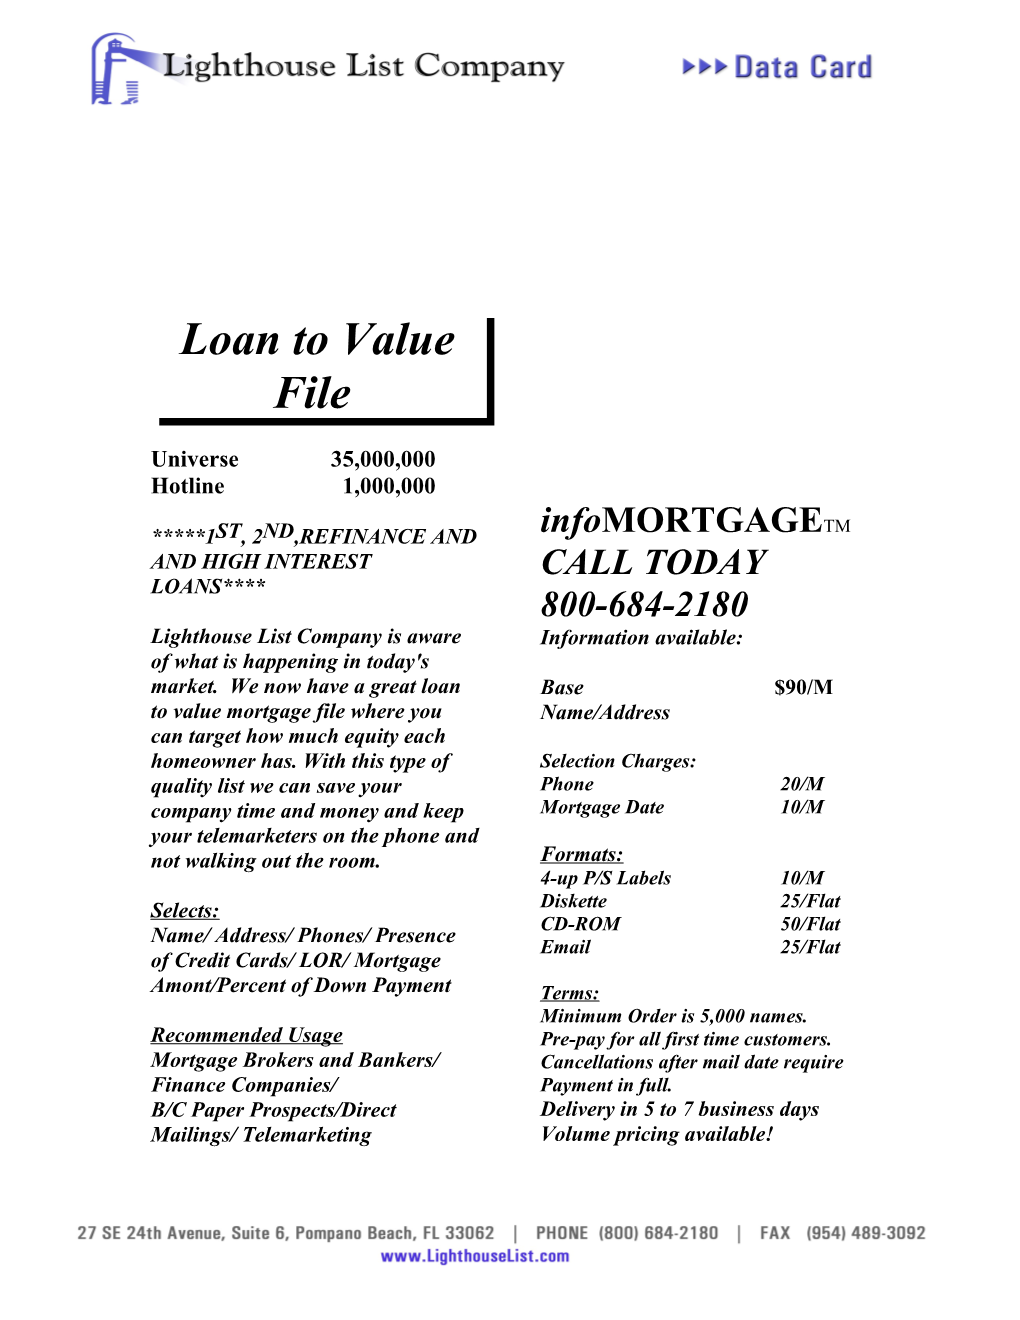 1St, 2Nd,Refinance and and High Interest Loans